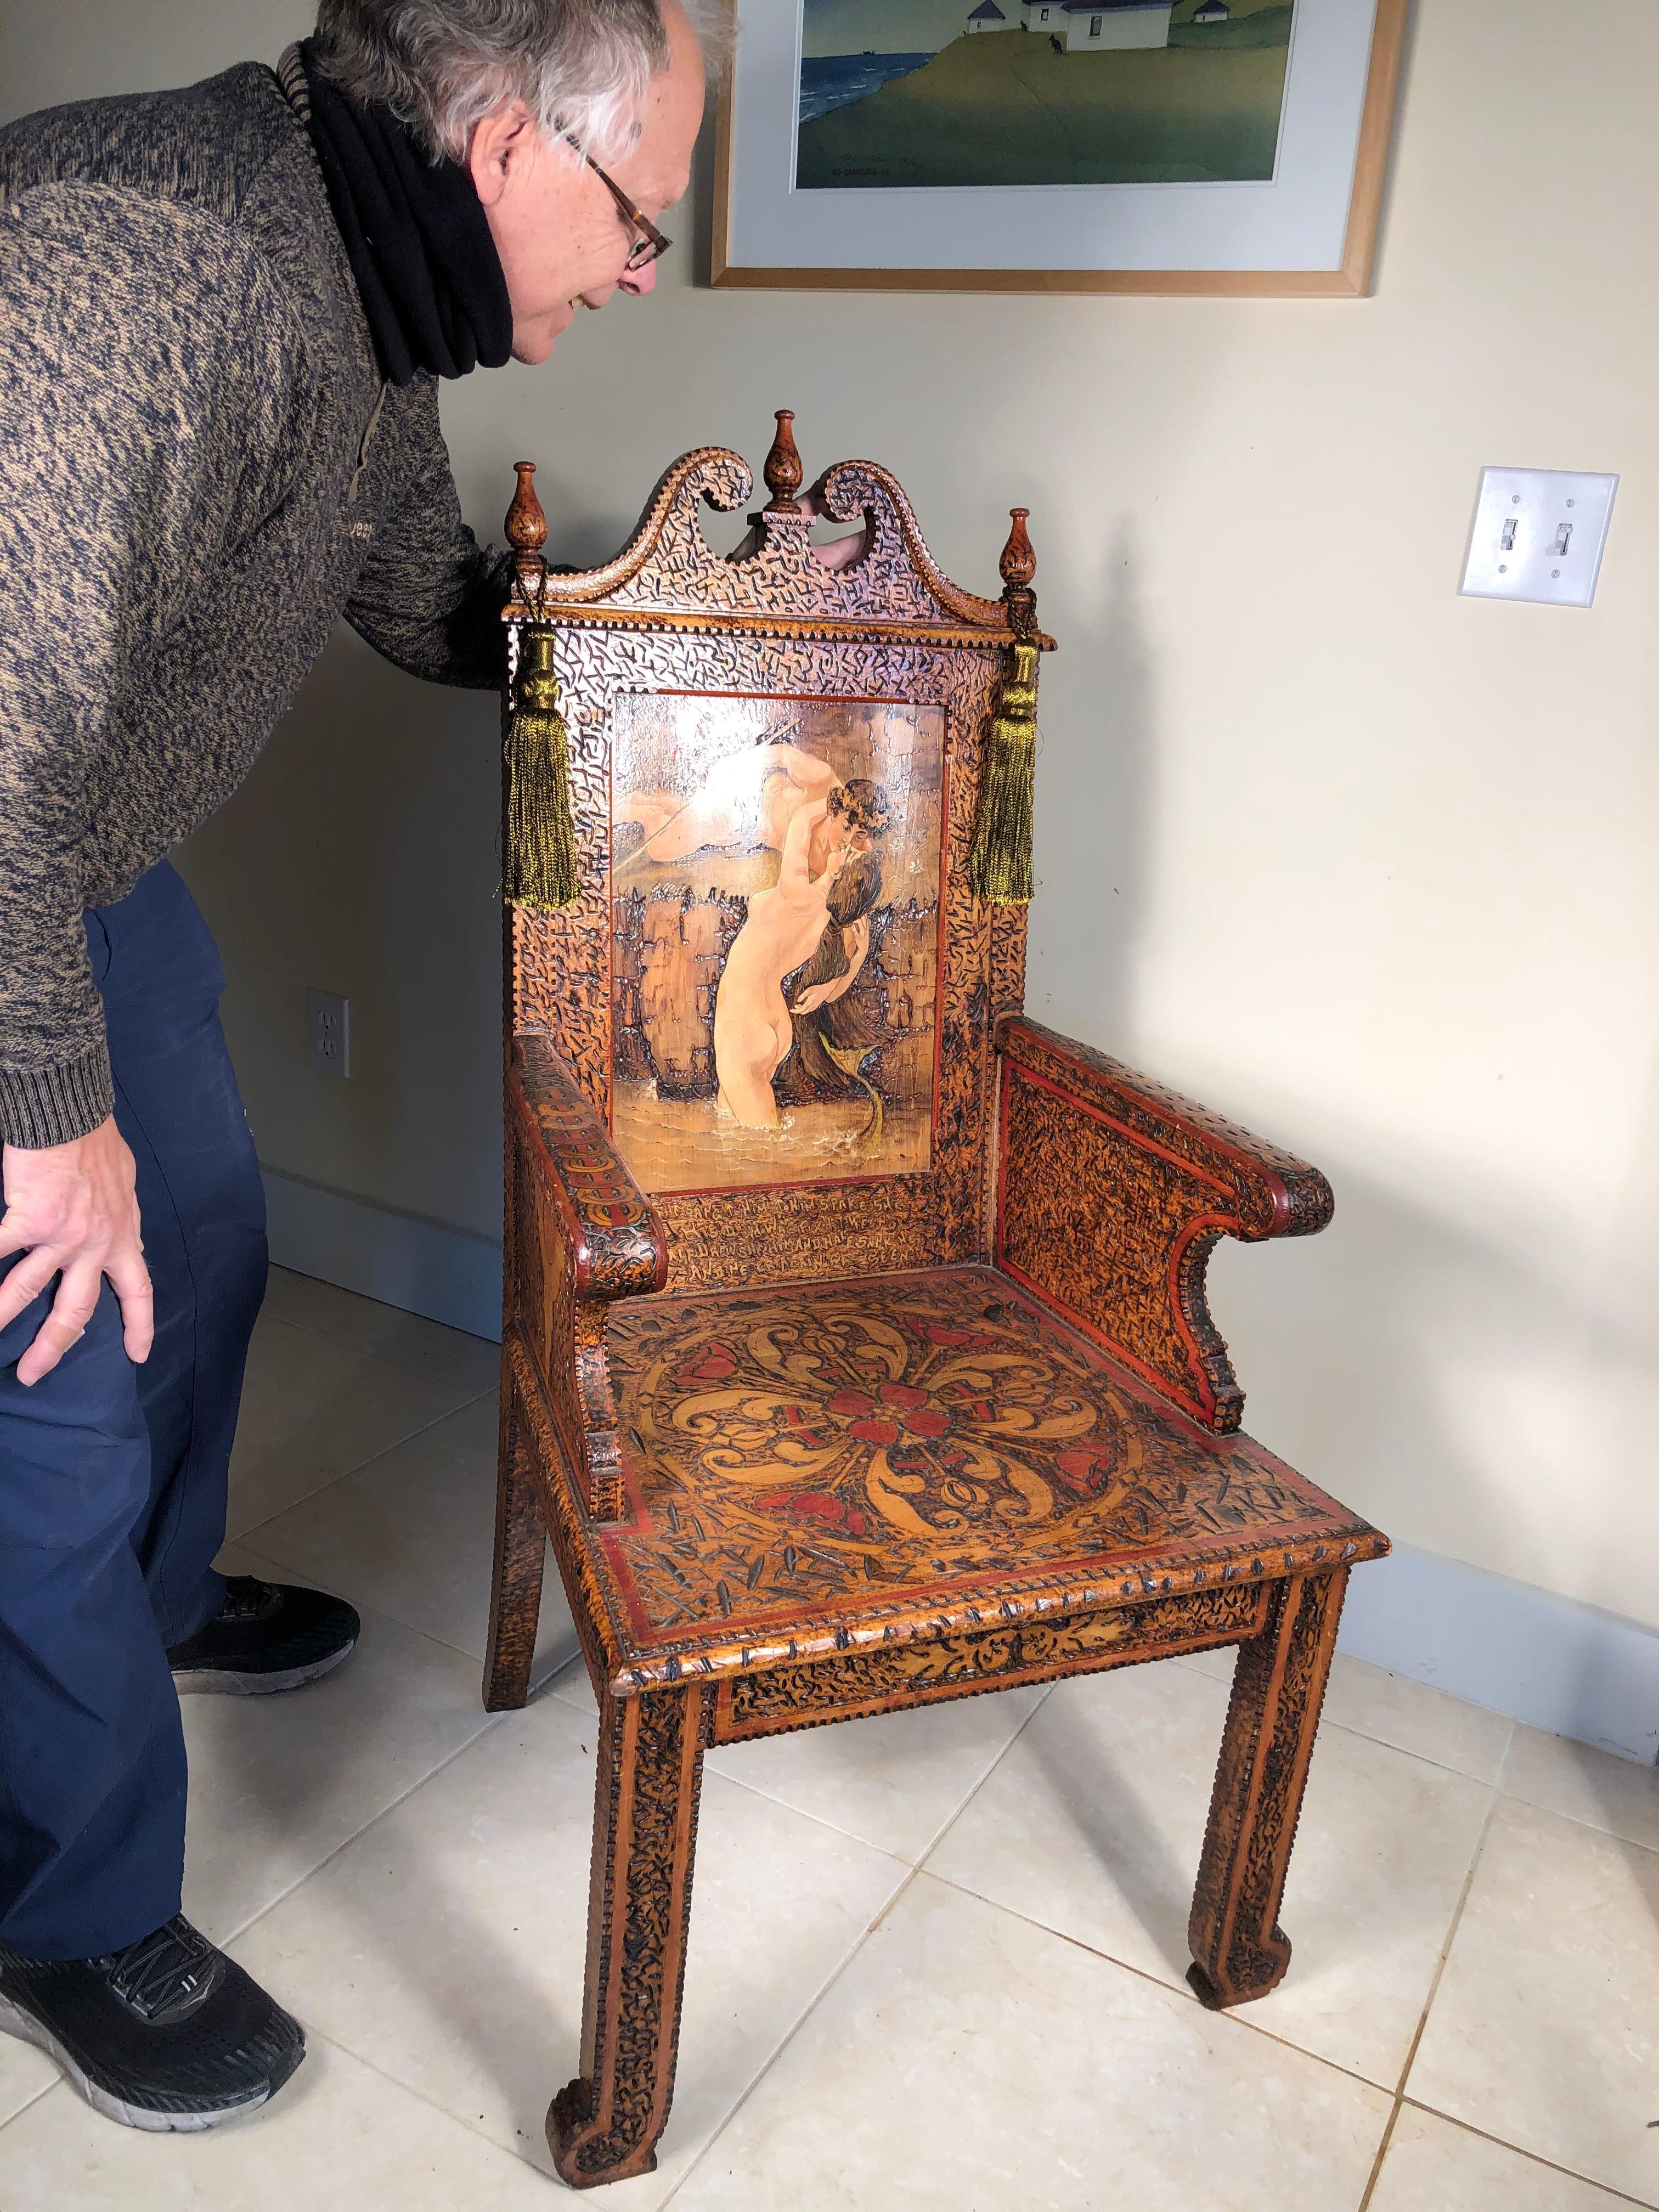 From an important thirty year old New England collection of hand decorated pyrography Arts & Crafts furnishings.

Unique work of art with a Rhode Island origin.

A romantic hand carved and hand painted one-of-a-kind throne chair painting and